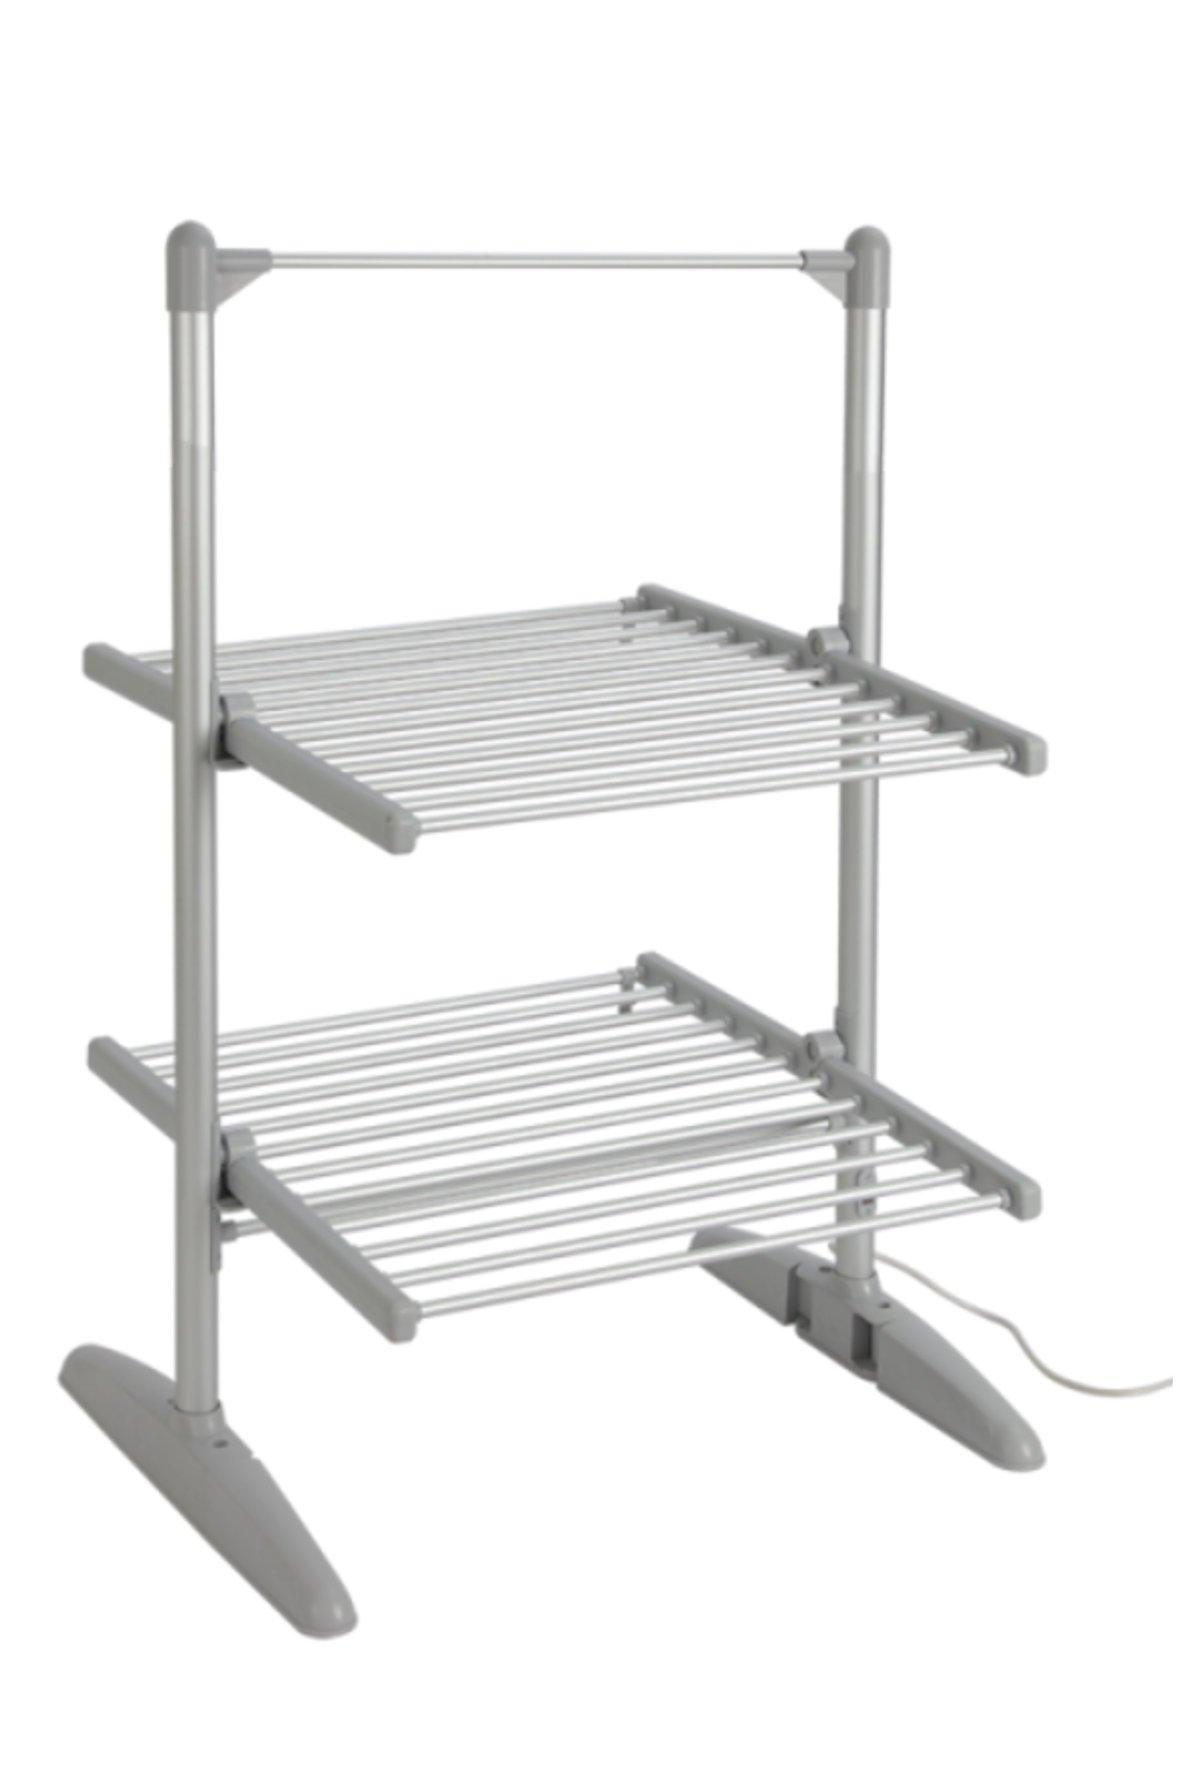 Heated Clothes Airer - 2 Tier